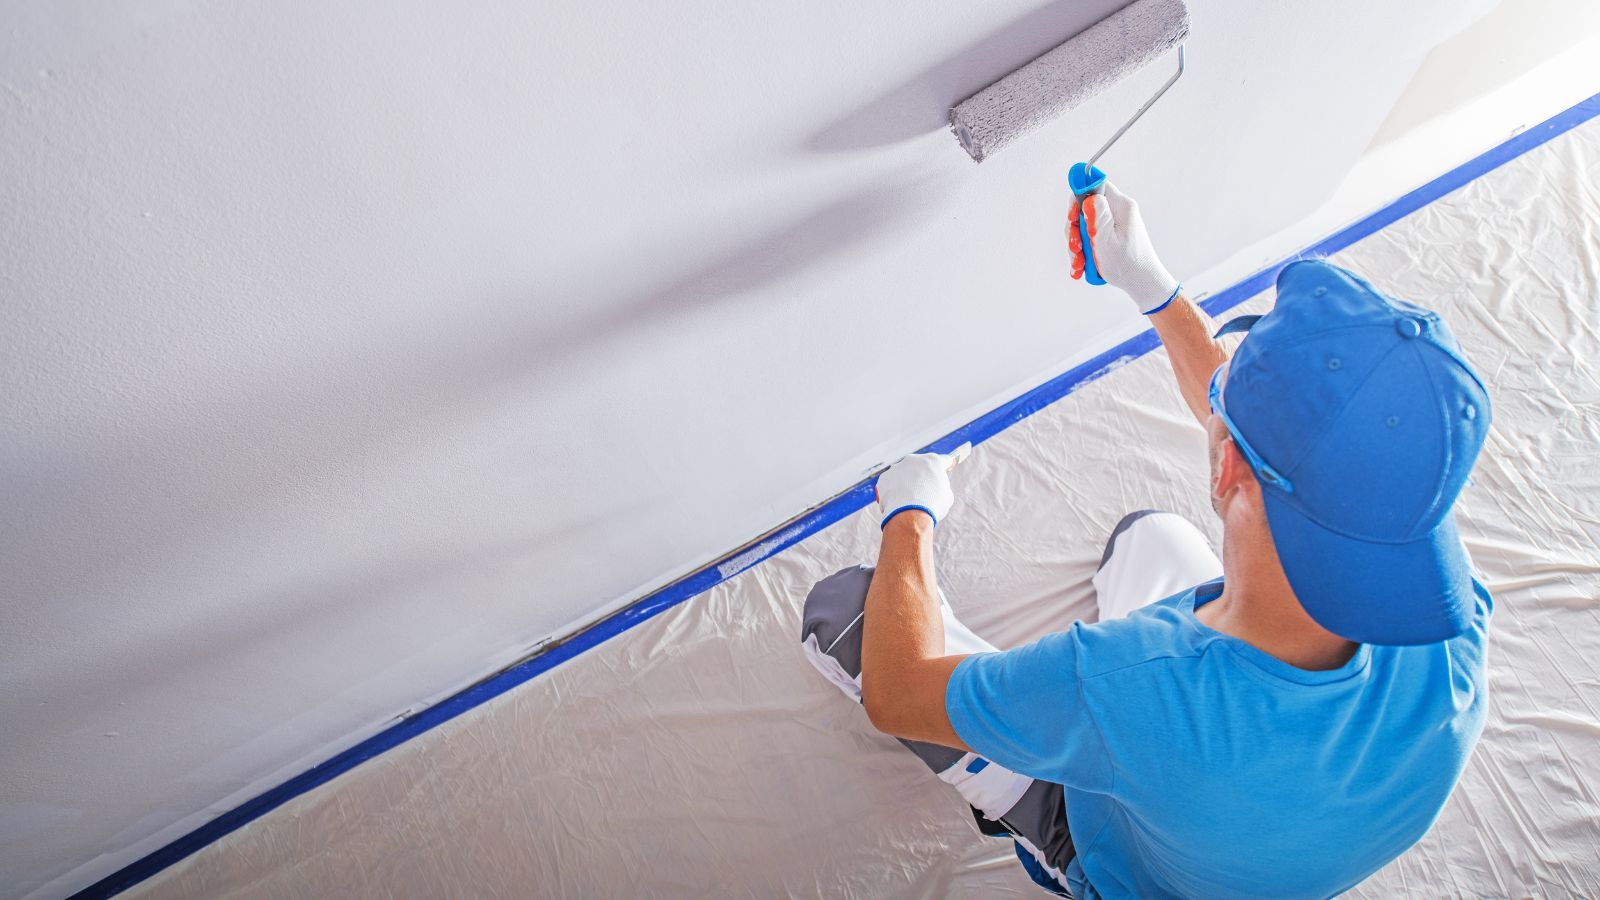 commercial interior painter working on business painting